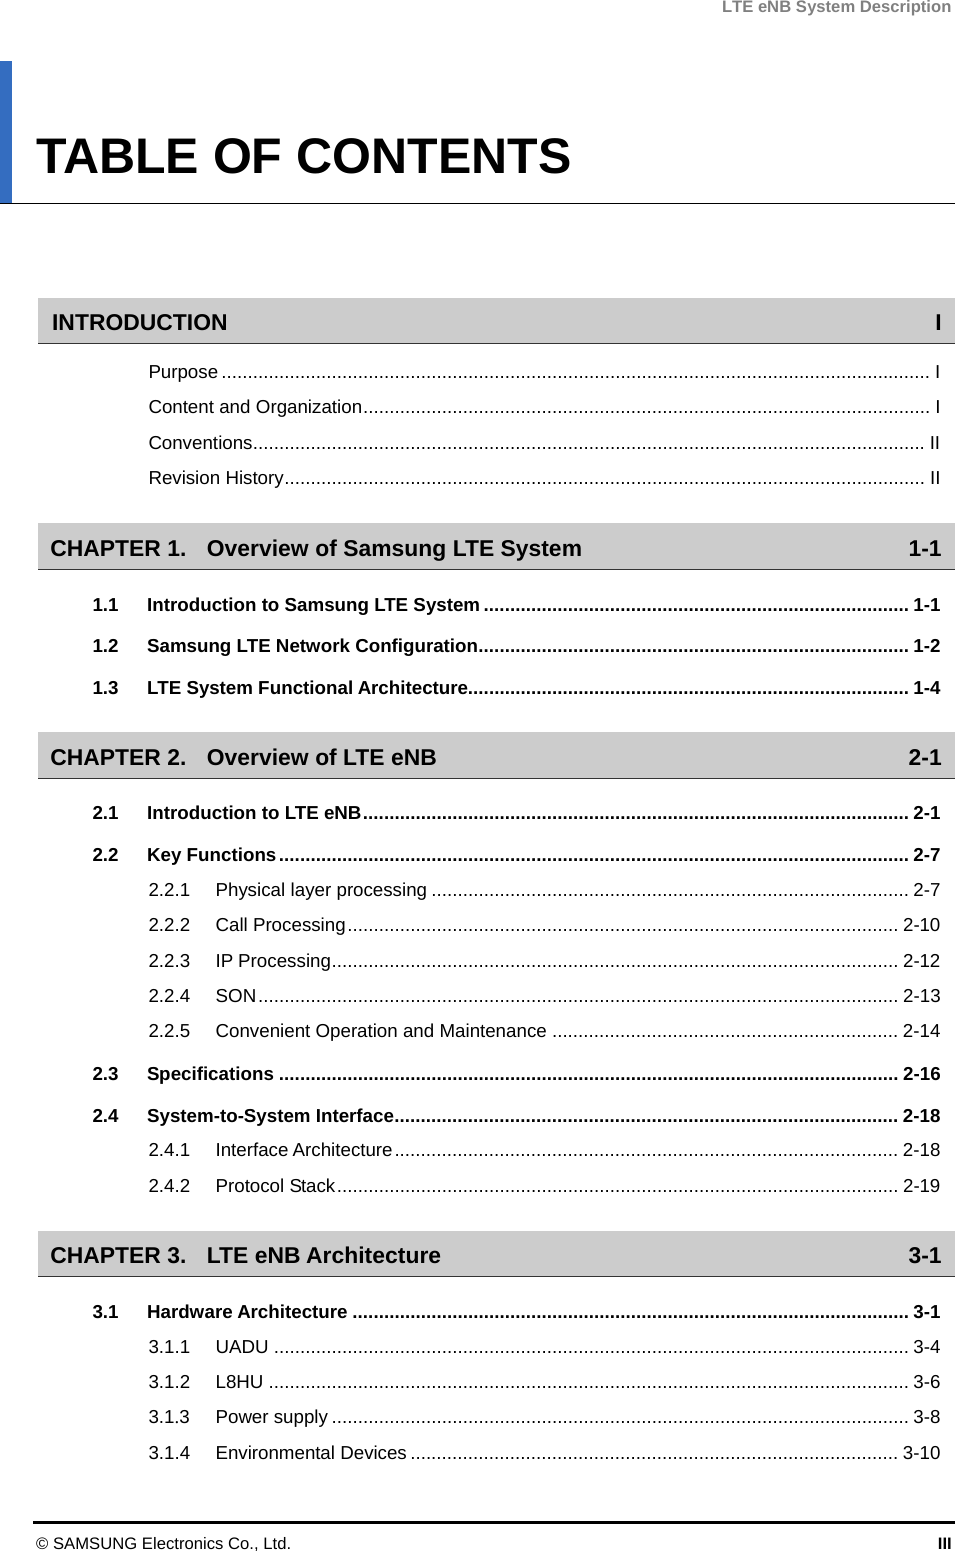 LTE eNB System Description TABLE OF CONTENTS   INTRODUCTION I Purpose ....................................................................................................................................... I Content and Organization............................................................................................................ I Conventions................................................................................................................................II Revision History.......................................................................................................................... II CHAPTER 1. Overview of Samsung LTE System 1-1 1.1 Introduction to Samsung LTE System ................................................................................. 1-1 1.2 Samsung LTE Network Configuration.................................................................................. 1-2 1.3 LTE System Functional Architecture.................................................................................... 1-4 CHAPTER 2. Overview of LTE eNB 2-1 2.1 Introduction to LTE eNB........................................................................................................ 2-1 2.2 Key Functions........................................................................................................................ 2-7 2.2.1 Physical layer processing ........................................................................................... 2-7 2.2.2 Call Processing......................................................................................................... 2-10 2.2.3 IP Processing............................................................................................................ 2-12 2.2.4 SON.......................................................................................................................... 2-13 2.2.5 Convenient Operation and Maintenance .................................................................. 2-14 2.3 Specifications ...................................................................................................................... 2-16 2.4 System-to-System Interface................................................................................................ 2-18 2.4.1 Interface Architecture................................................................................................ 2-18 2.4.2 Protocol Stack........................................................................................................... 2-19 CHAPTER 3. LTE eNB Architecture 3-1 3.1 Hardware Architecture .......................................................................................................... 3-1 3.1.1 UADU ......................................................................................................................... 3-4 3.1.2 L8HU .......................................................................................................................... 3-6 3.1.3 Power supply .............................................................................................................. 3-8 3.1.4 Environmental Devices ............................................................................................. 3-10 © SAMSUNG Electronics Co., Ltd.  III 